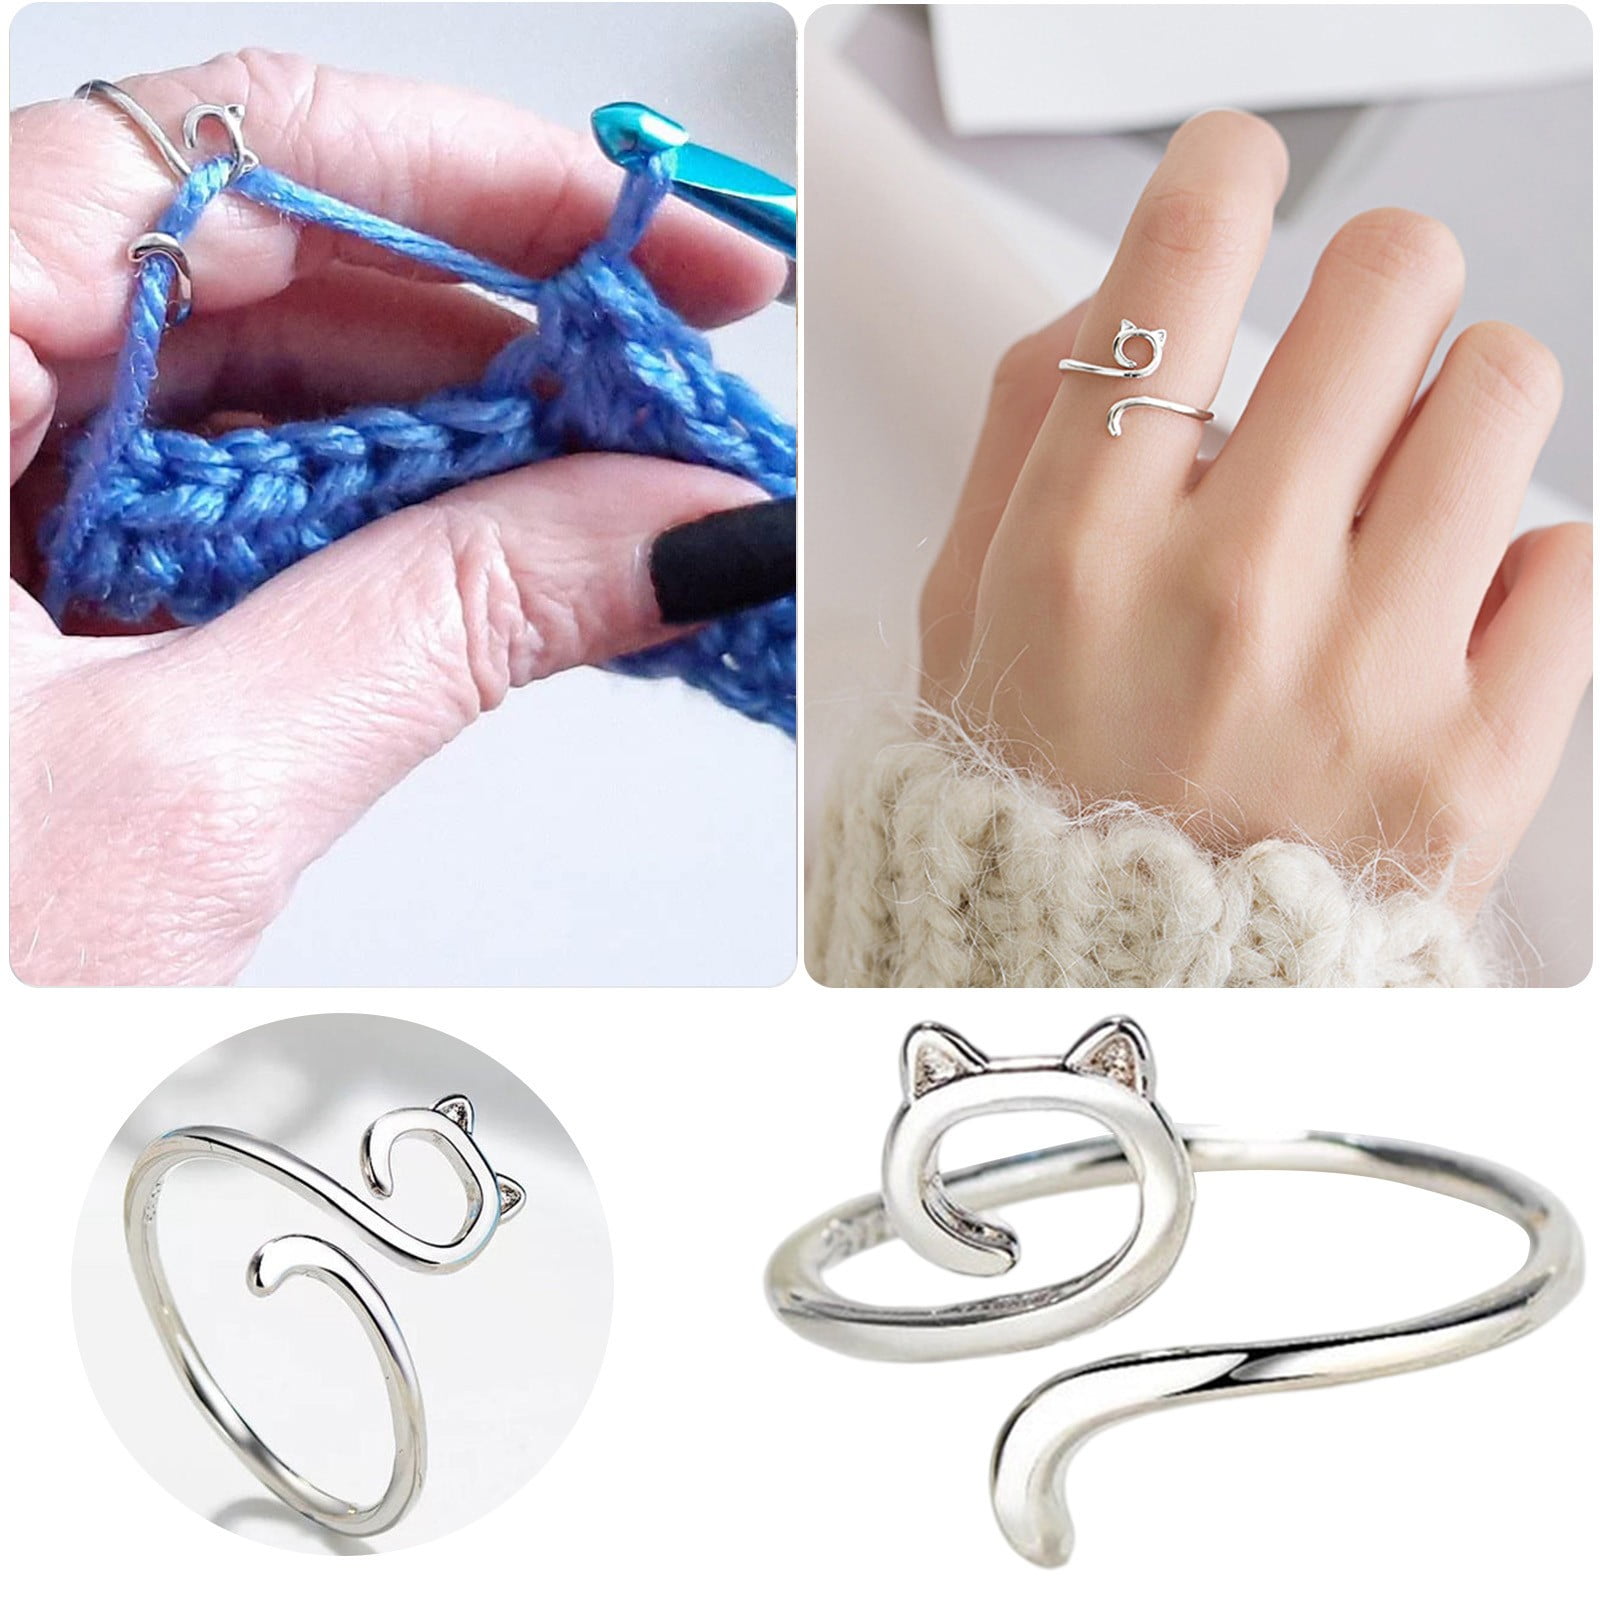  SEWACC 2pcs Knitted Crochet Embroidery Finger Ring